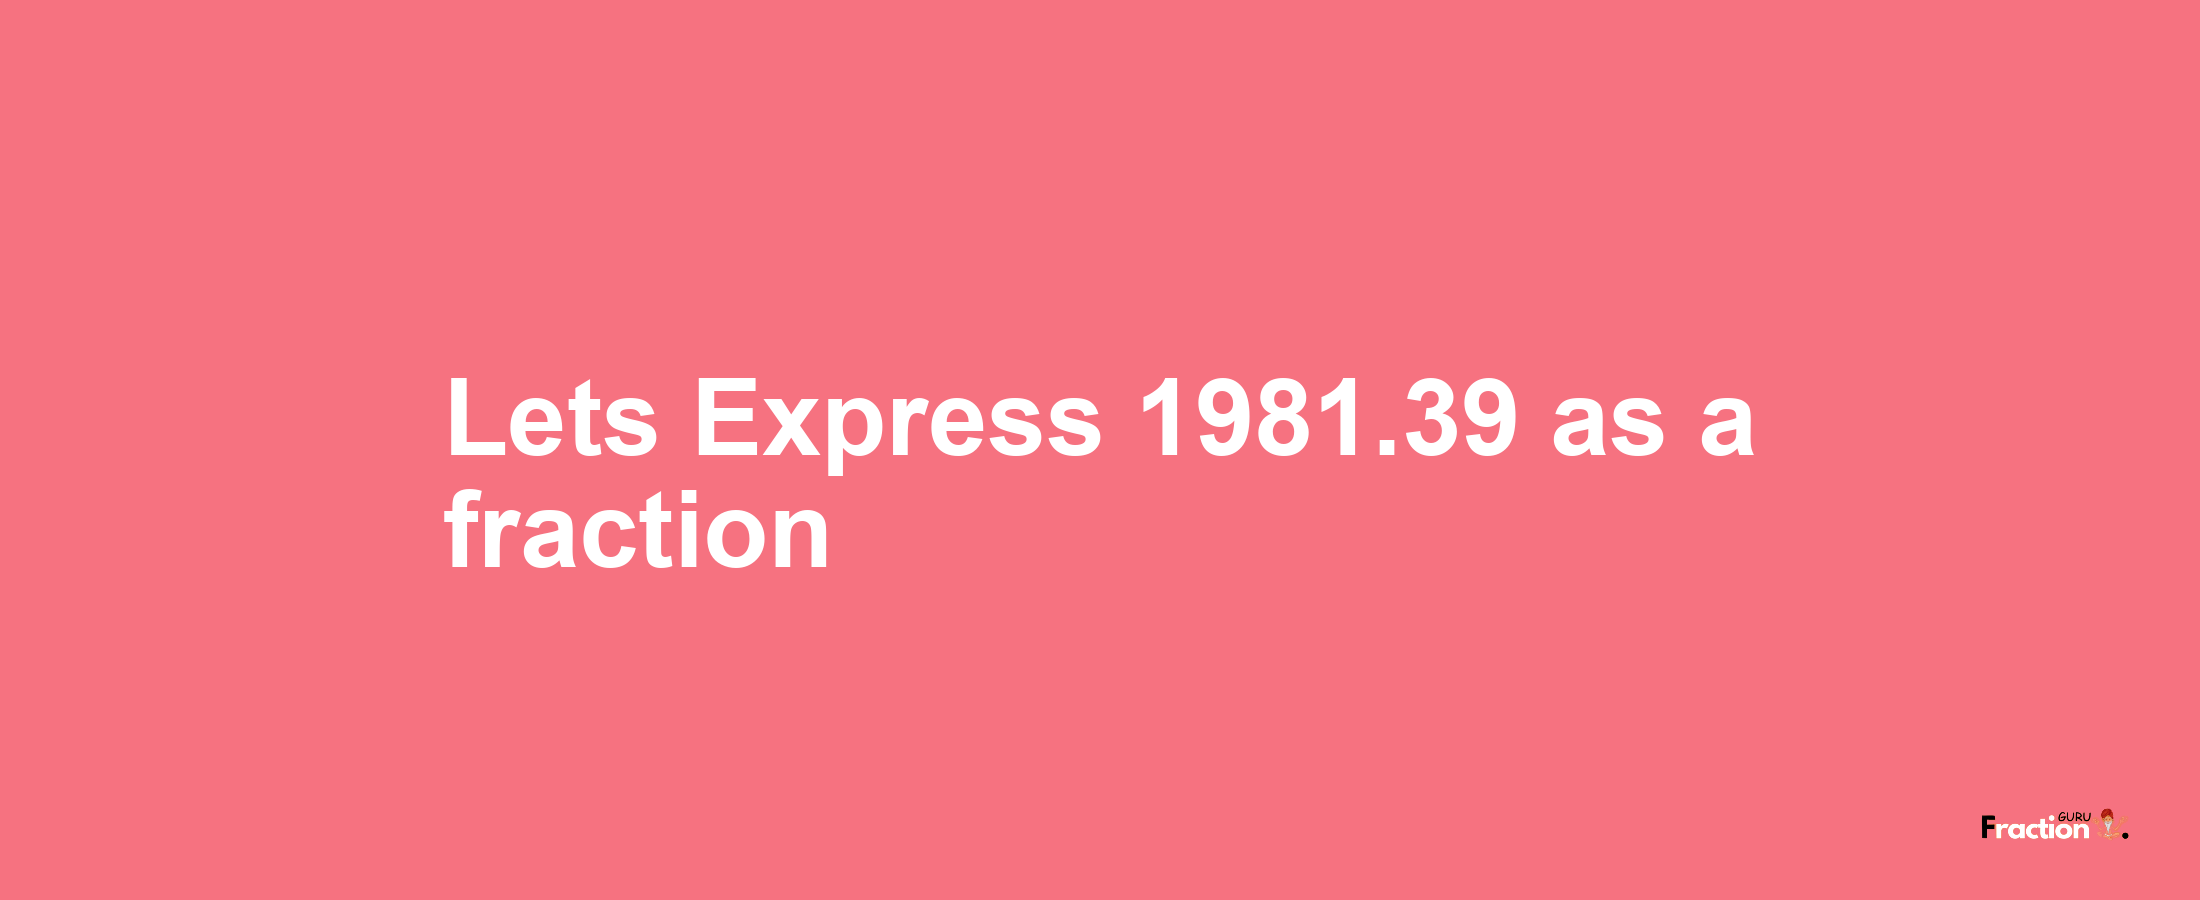 Lets Express 1981.39 as afraction